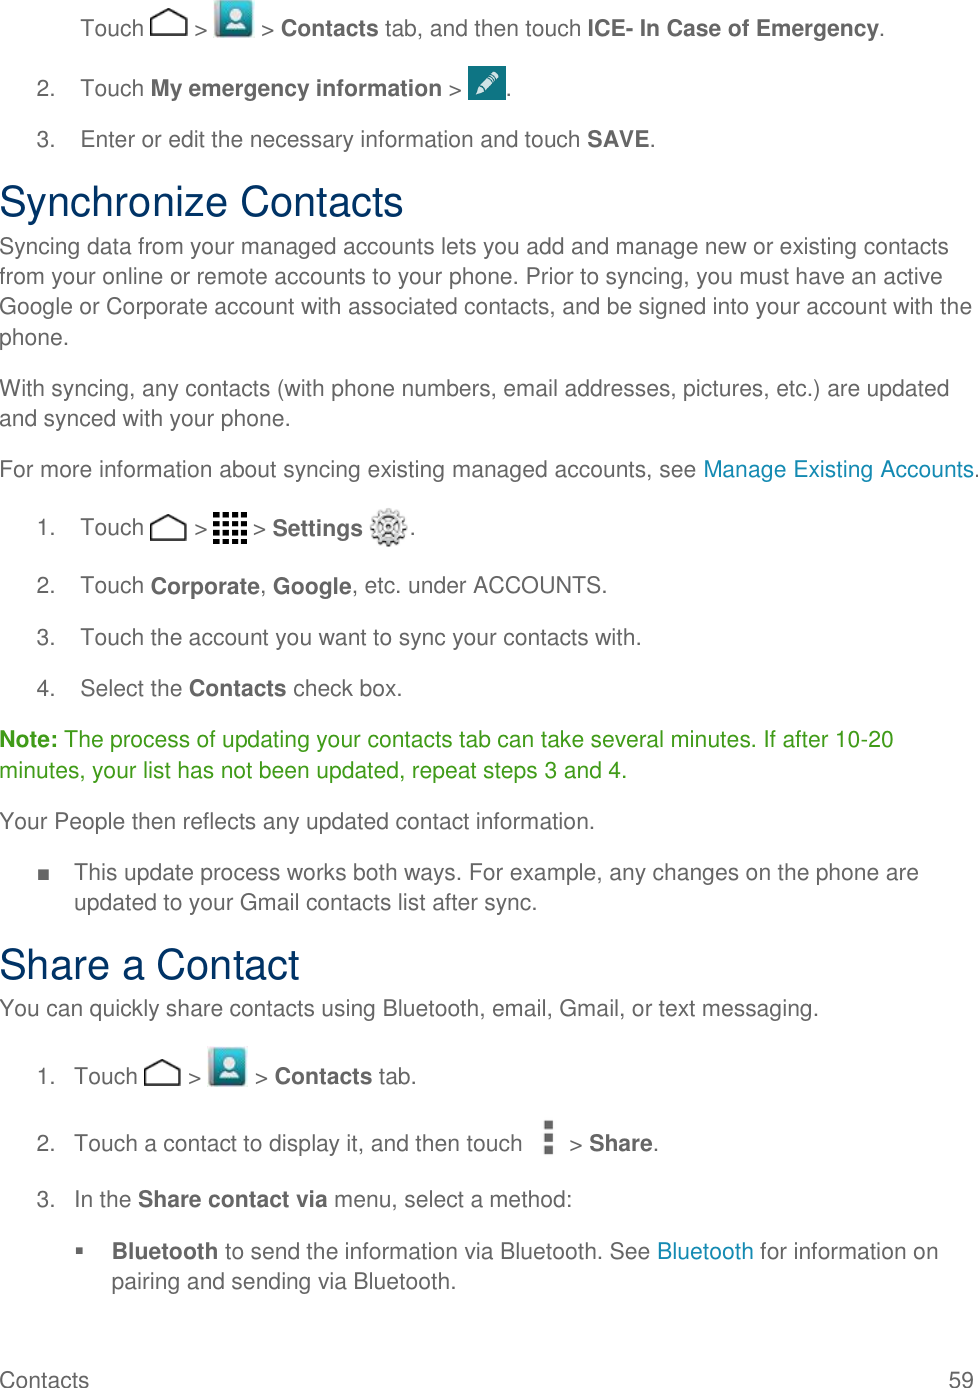 Contacts    59  Touch   &gt;   &gt; Contacts tab, and then touch ICE- In Case of Emergency. 2.  Touch My emergency information &gt;  . 3.  Enter or edit the necessary information and touch SAVE. Synchronize Contacts Syncing data from your managed accounts lets you add and manage new or existing contacts from your online or remote accounts to your phone. Prior to syncing, you must have an active Google or Corporate account with associated contacts, and be signed into your account with the phone. With syncing, any contacts (with phone numbers, email addresses, pictures, etc.) are updated and synced with your phone. For more information about syncing existing managed accounts, see Manage Existing Accounts. 1.  Touch   &gt;   &gt; Settings  . 2.  Touch Corporate, Google, etc. under ACCOUNTS. 3.  Touch the account you want to sync your contacts with. 4.  Select the Contacts check box. Note: The process of updating your contacts tab can take several minutes. If after 10-20 minutes, your list has not been updated, repeat steps 3 and 4. Your People then reflects any updated contact information. ■  This update process works both ways. For example, any changes on the phone are updated to your Gmail contacts list after sync. Share a Contact You can quickly share contacts using Bluetooth, email, Gmail, or text messaging. 1.  Touch   &gt;   &gt; Contacts tab. 2.  Touch a contact to display it, and then touch &gt; Share. 3.  In the Share contact via menu, select a method:  Bluetooth to send the information via Bluetooth. See Bluetooth for information on pairing and sending via Bluetooth. 